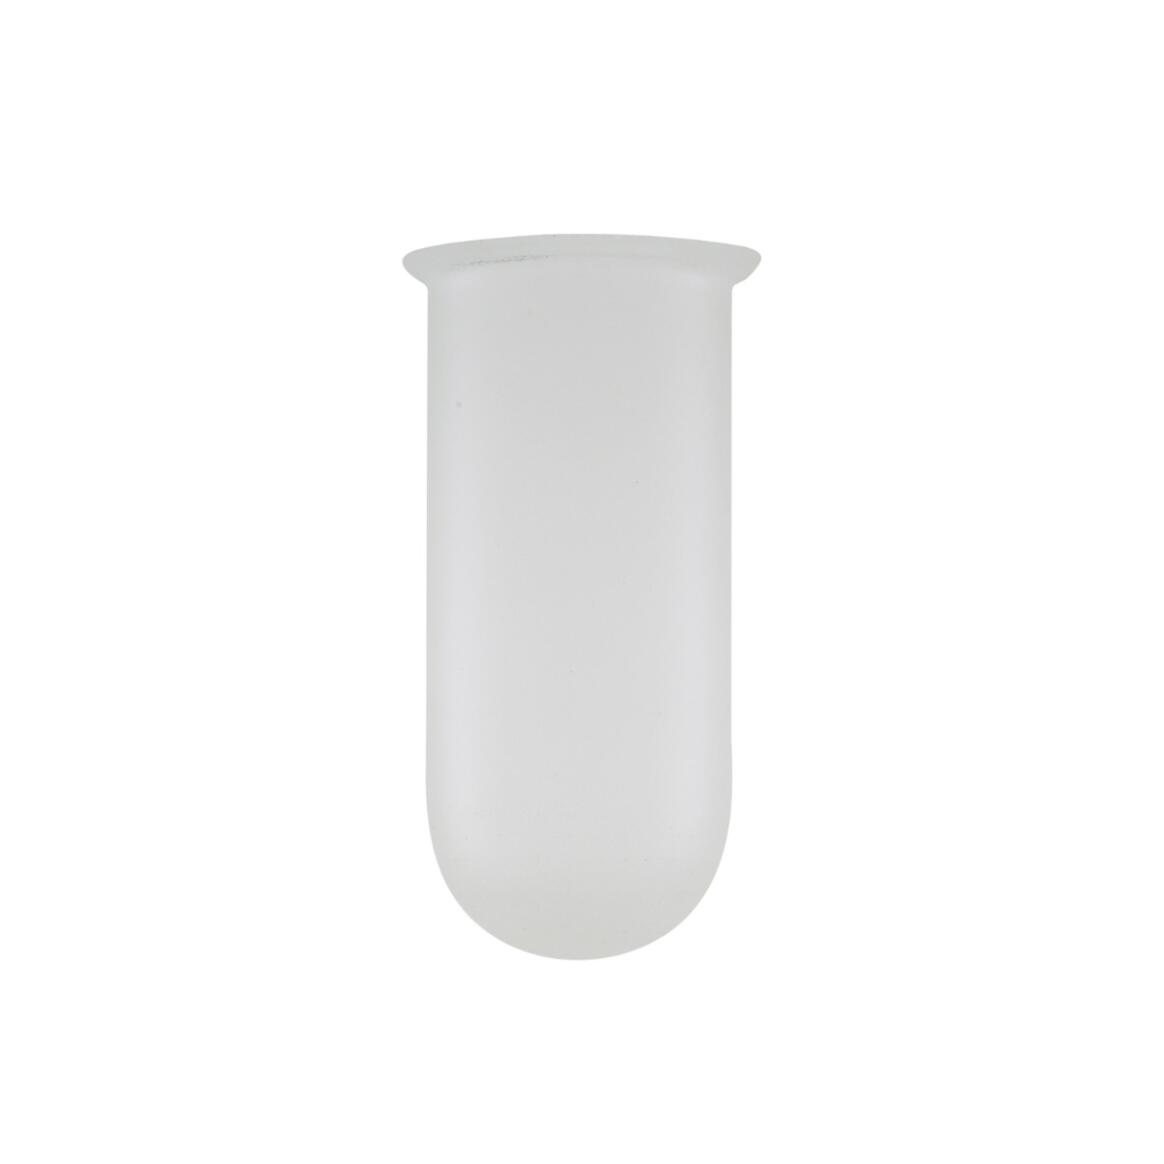 Frosted well glass lamp shade main product image